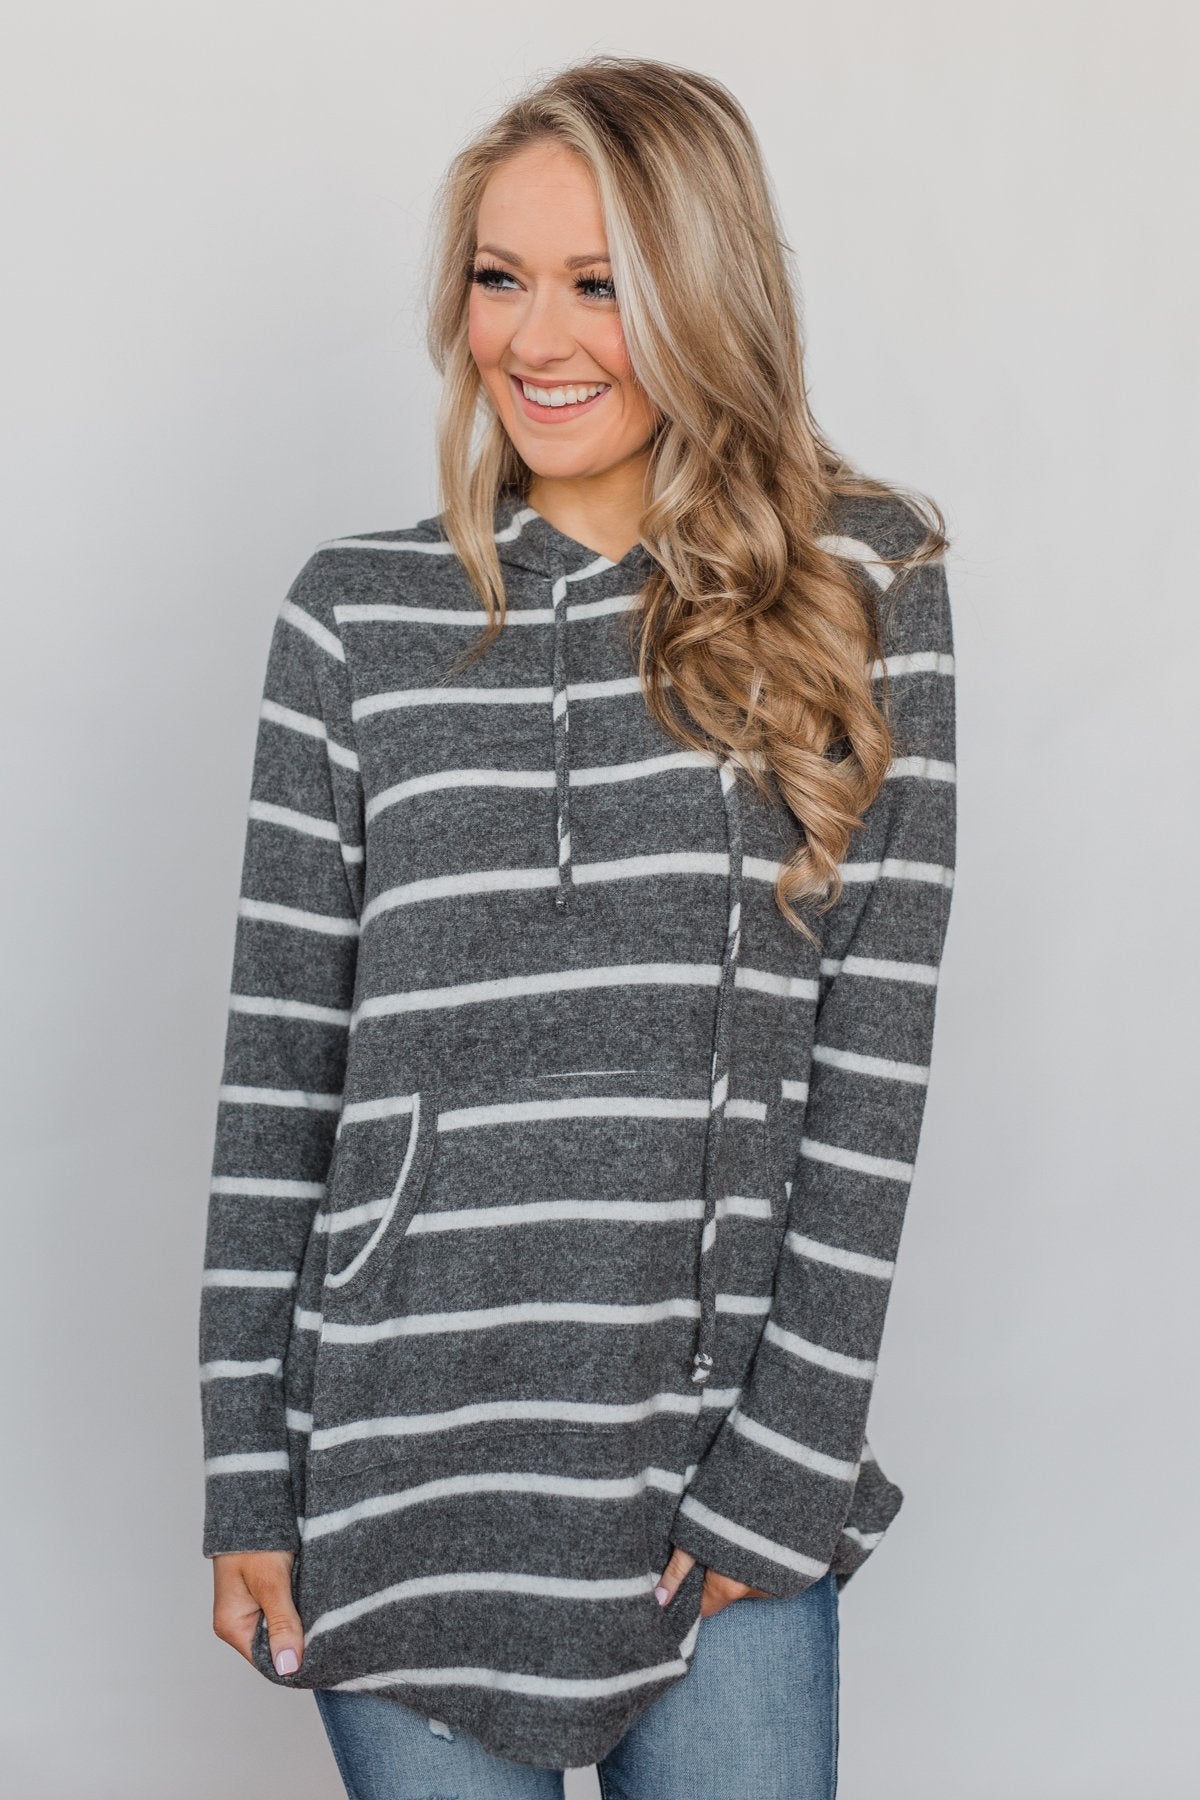 Can't Stop This Feeling Tunic Hoodie - Grey & White